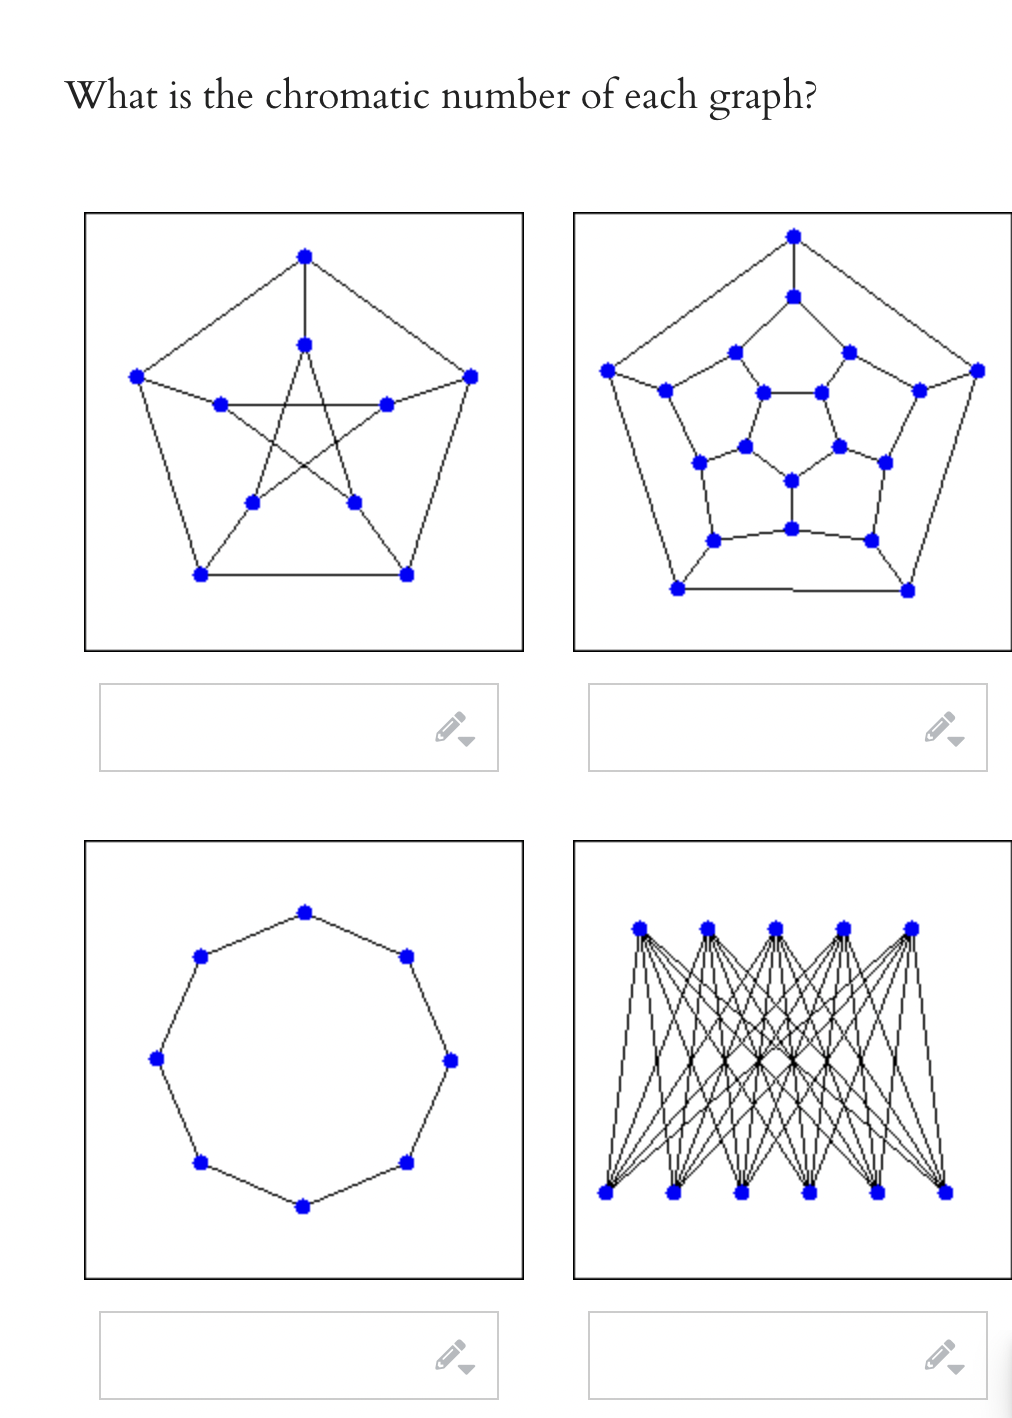 What is the chromatic number of each graph?
I
9.
AI